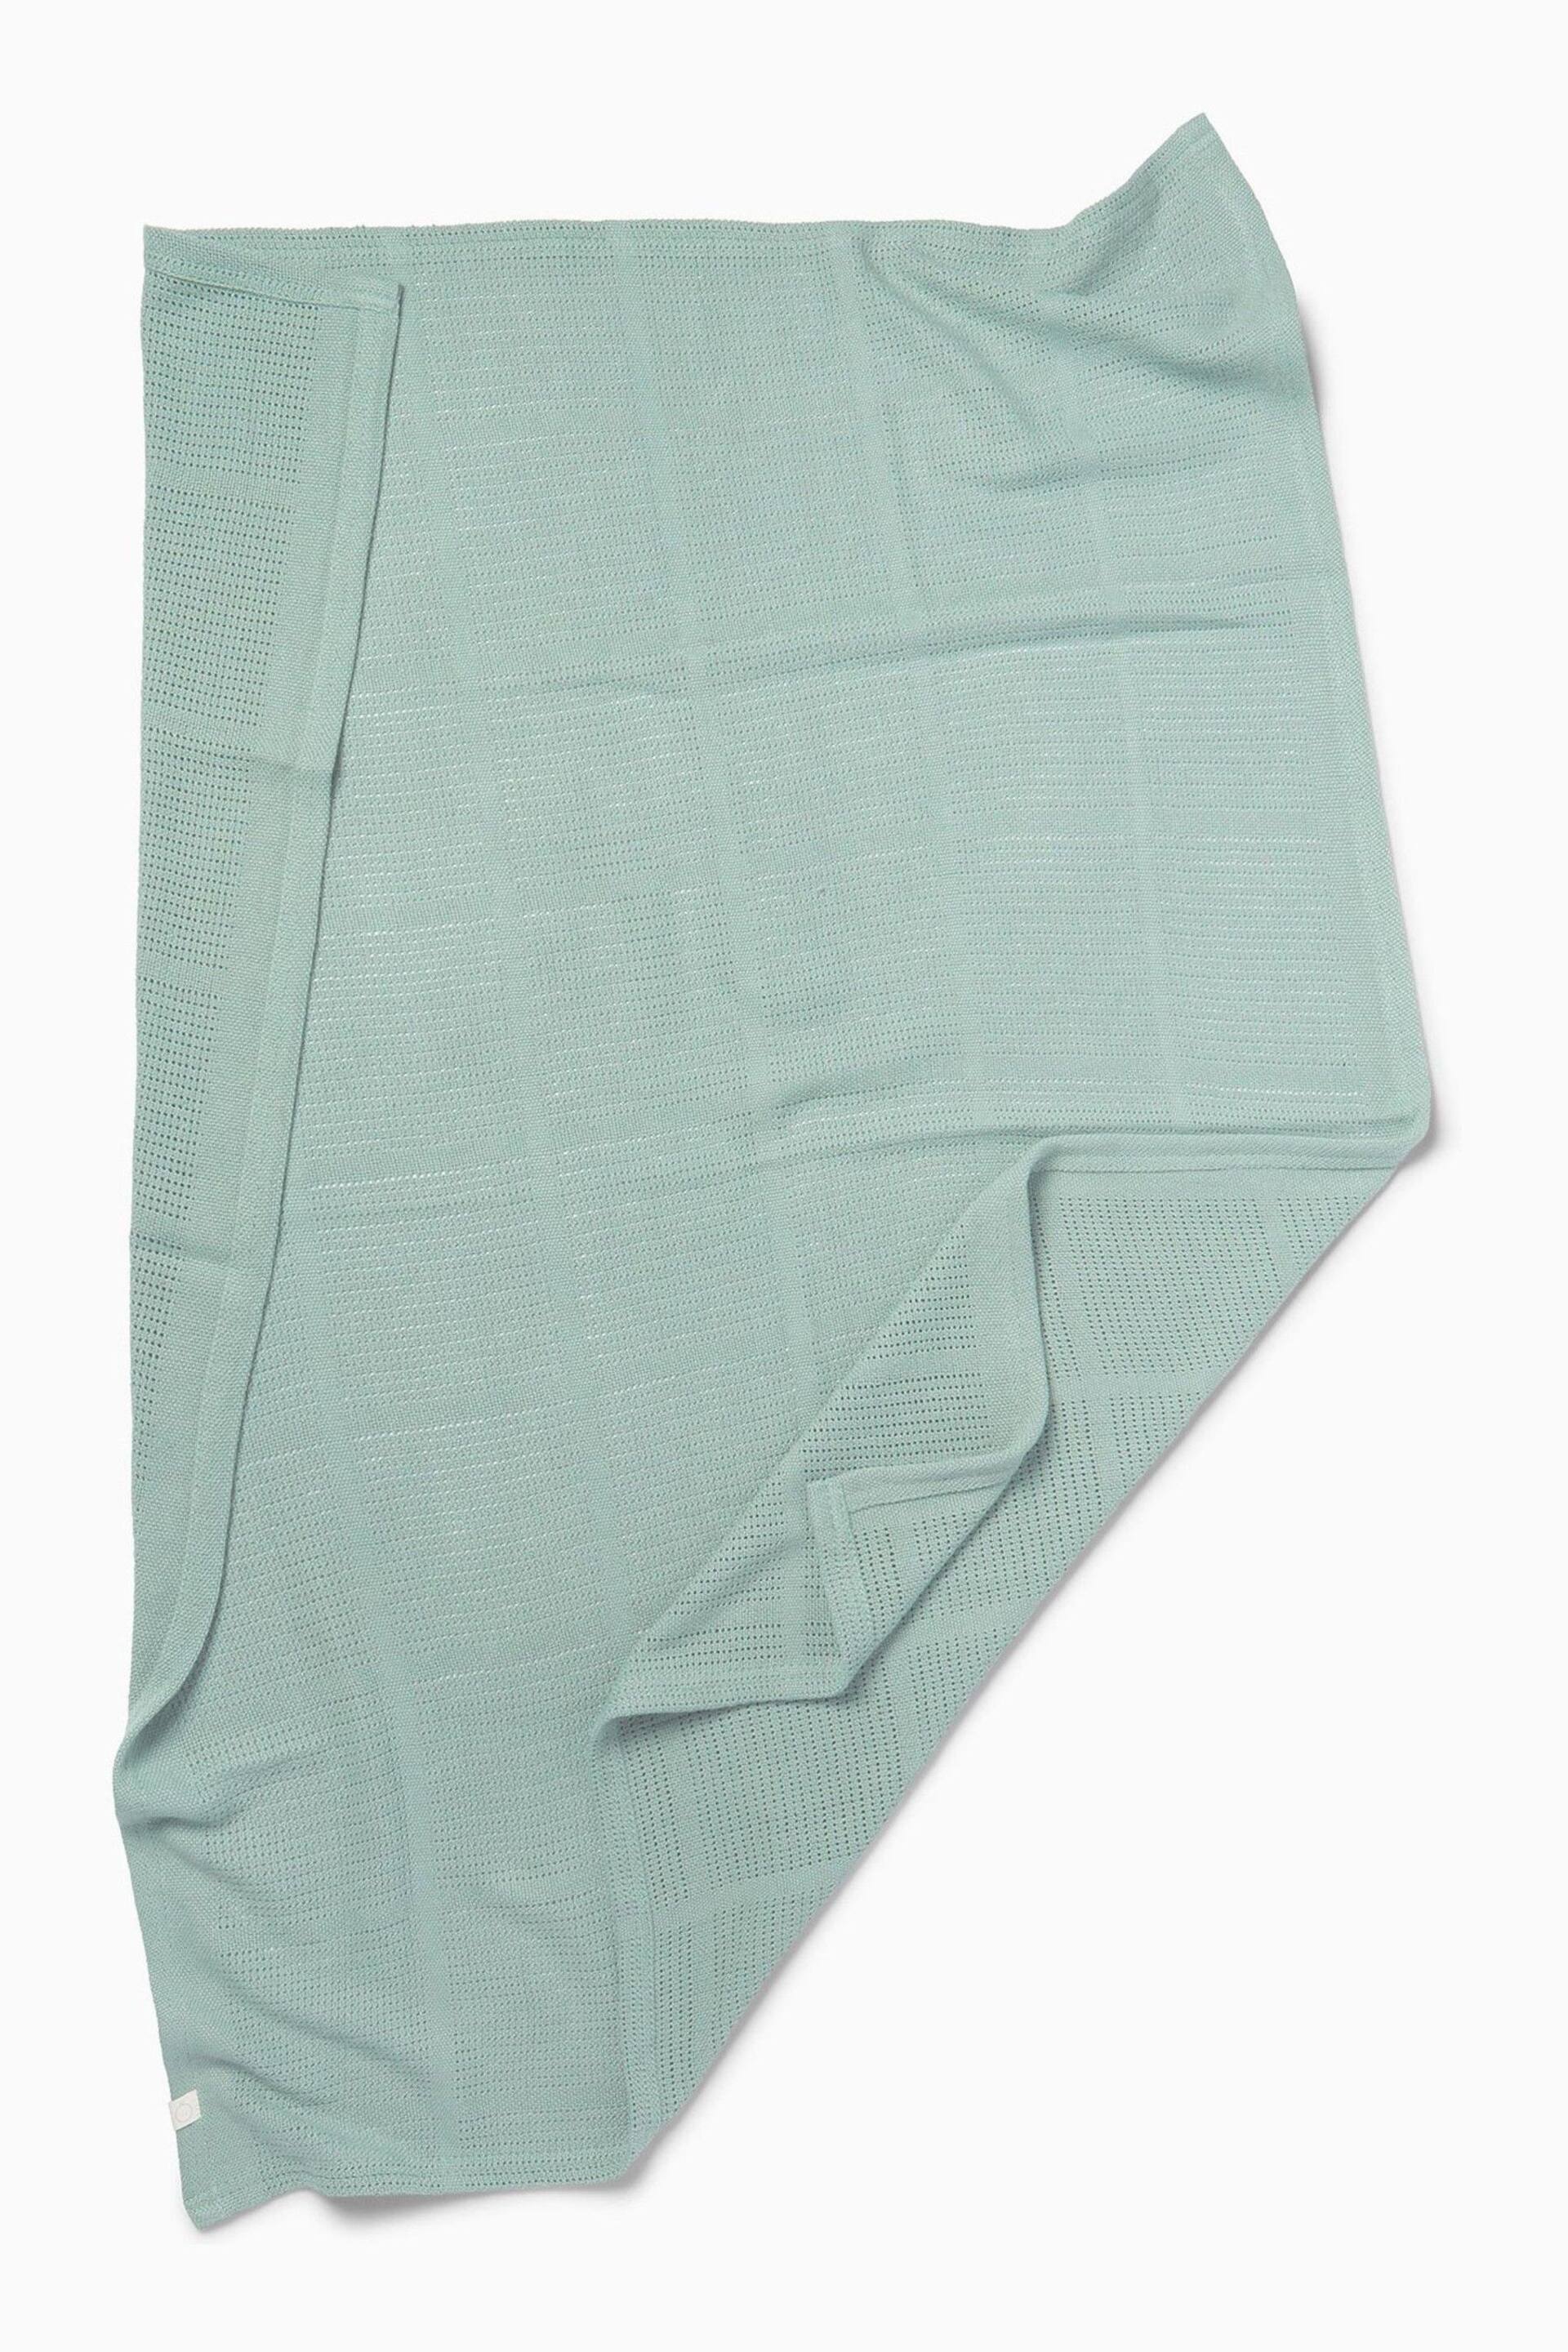 MORI Green Soft Cotton & Bamboo Cellular Baby Blanket - Image 2 of 5